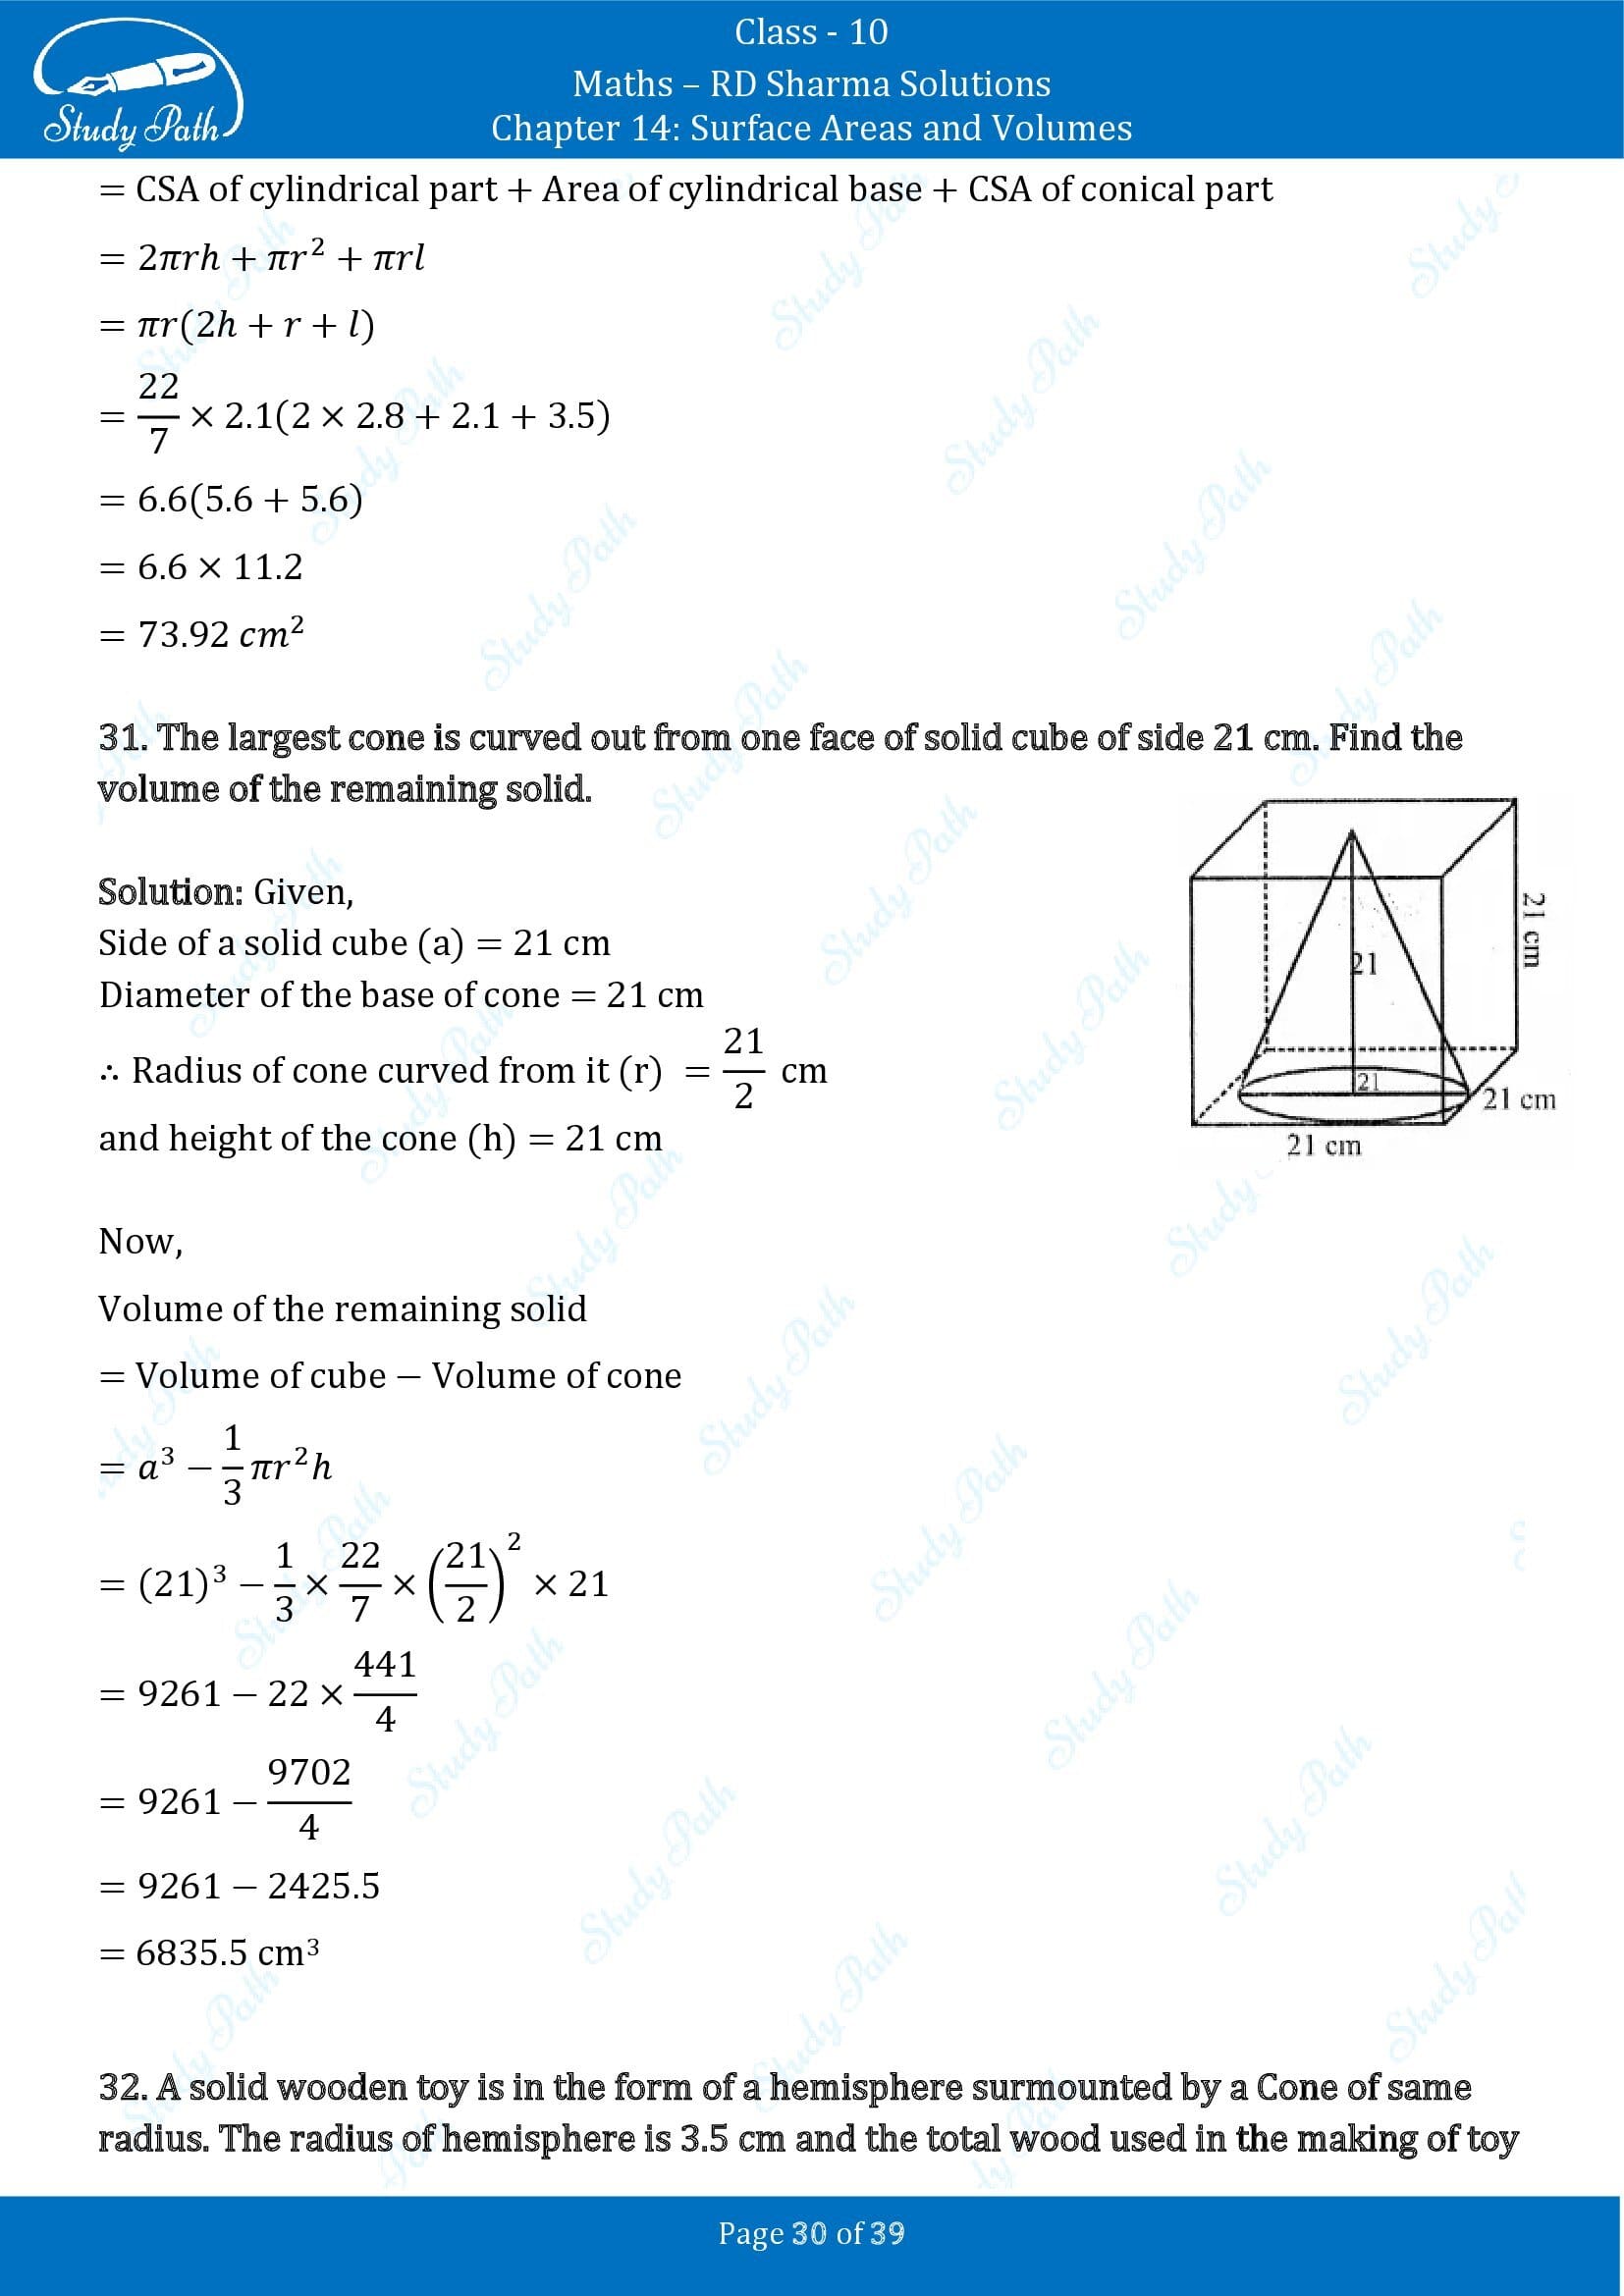 RD Sharma Solutions Class 10 Chapter 14 Surface Areas and Volumes Exercise 14.2 00030